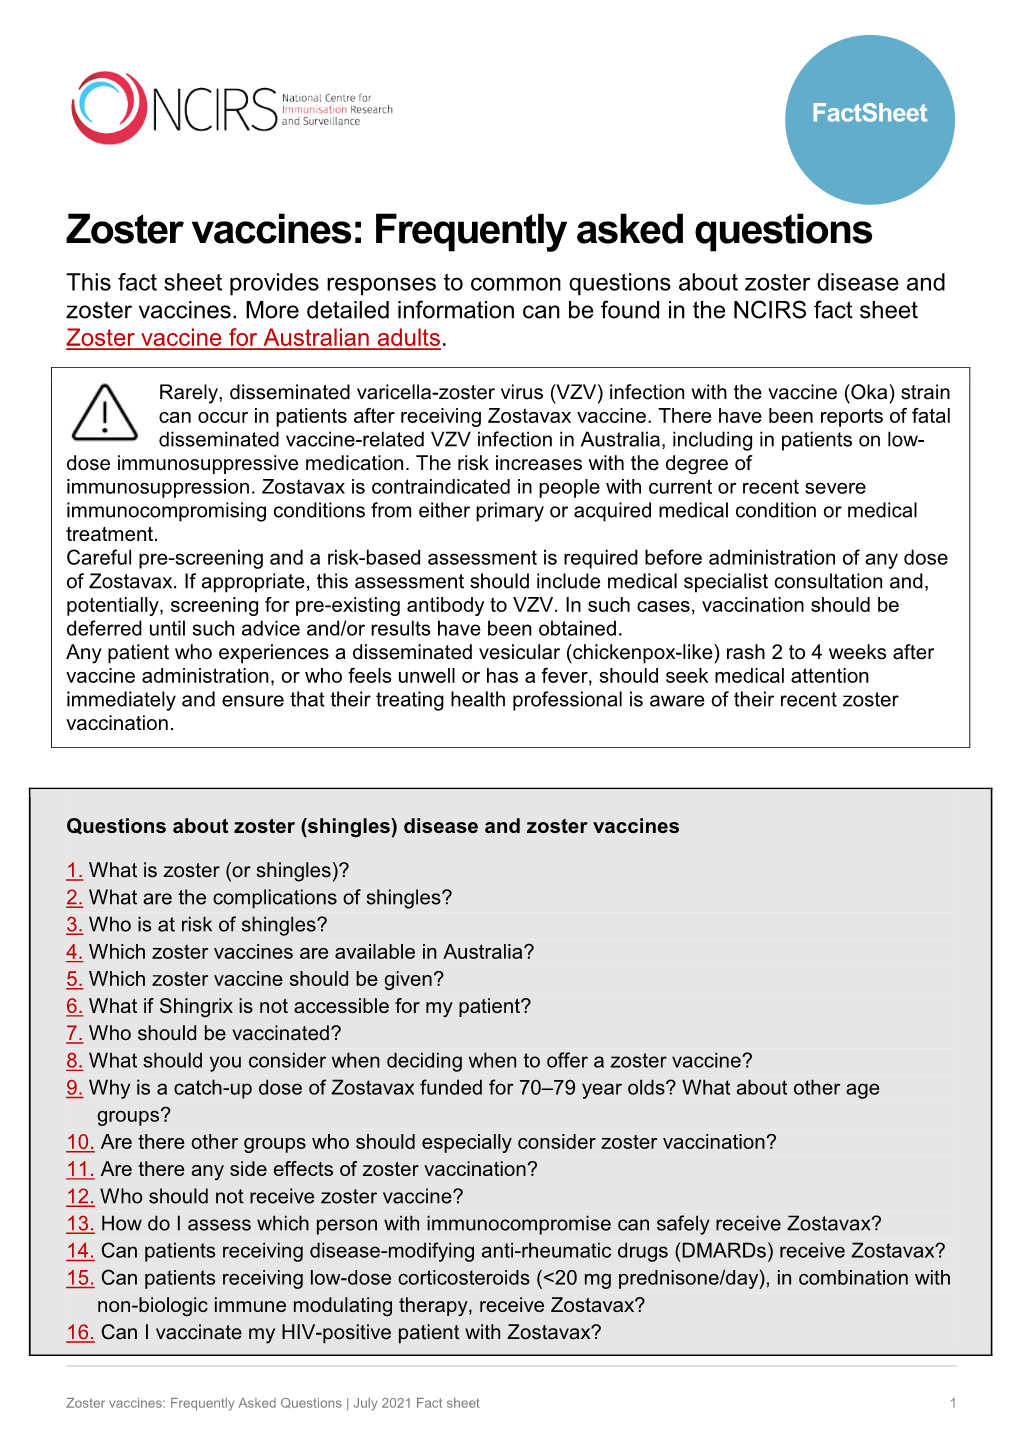 Zoster Vaccines: Frequently Asked Questions This Fact Sheet Provides Responses to Common Questions About Zoster Disease and Zoster Vaccines